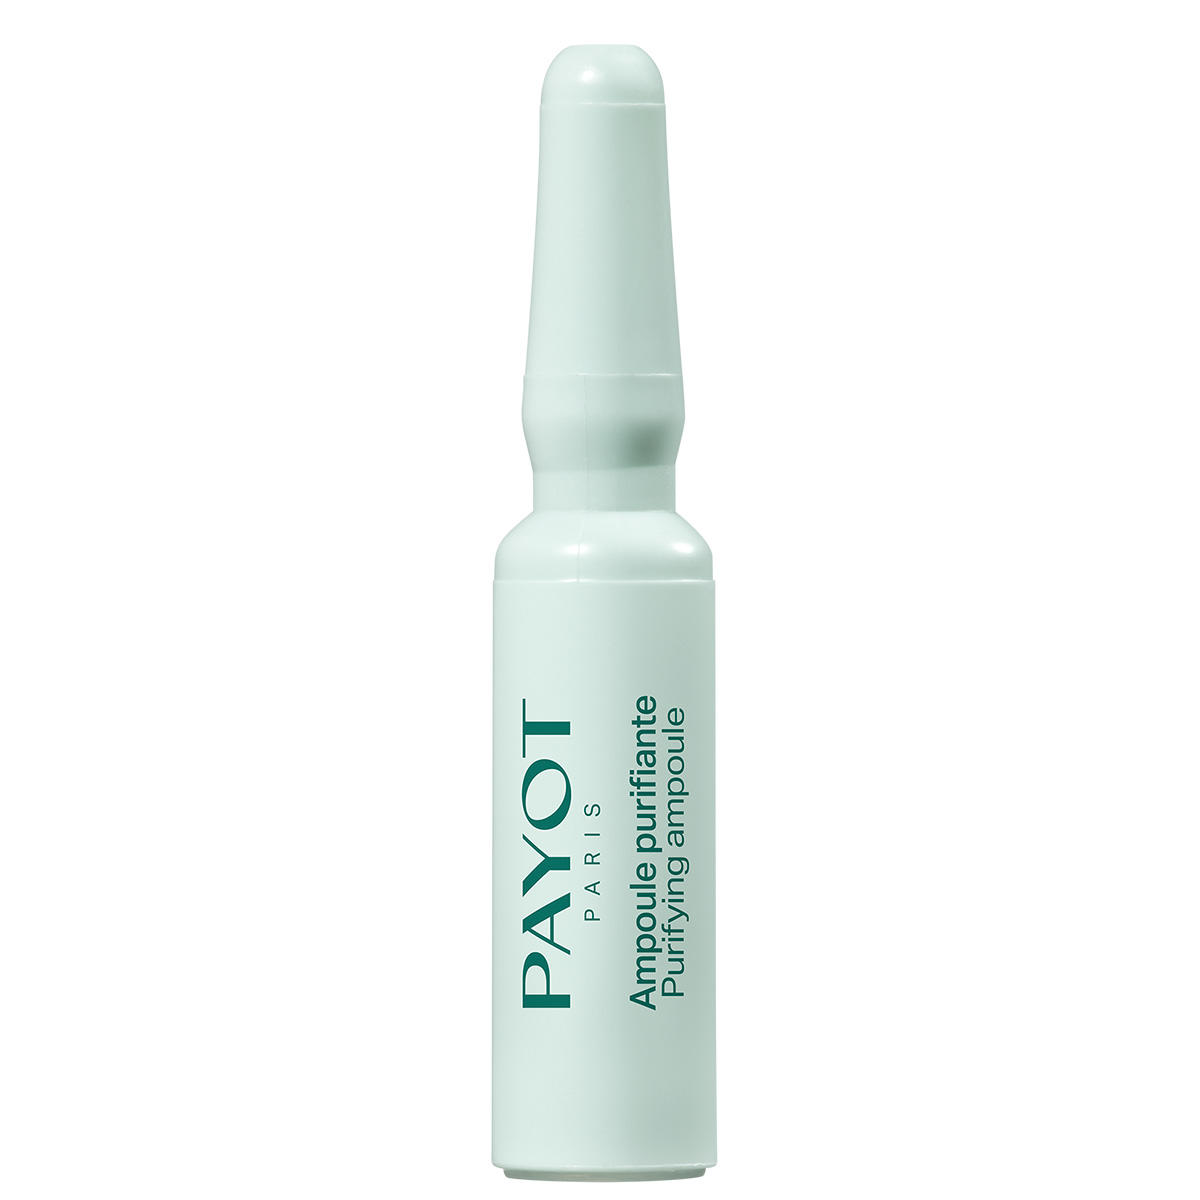 Payot Pâte Grise 7-day express purifying intensive treatment 7 x 1,5 ml - 2